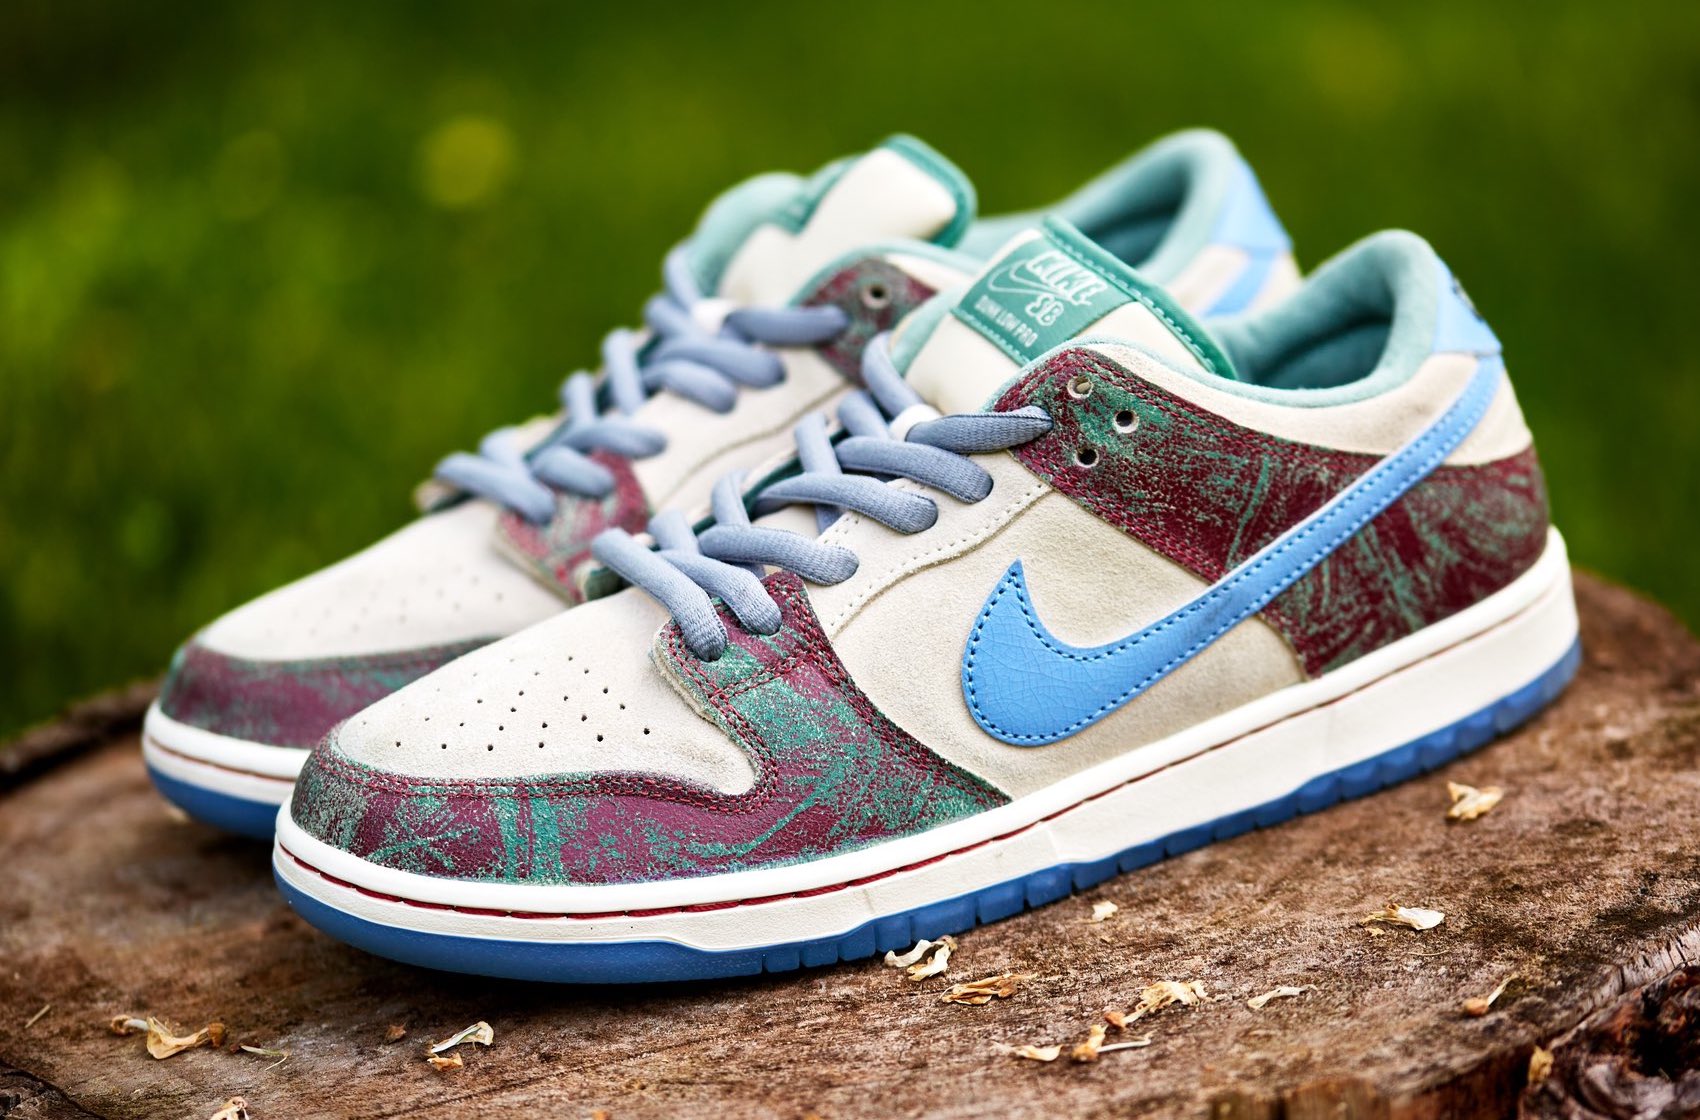 A Better Look at the Crenshaw Skate Club x Nike SB Dunk Low